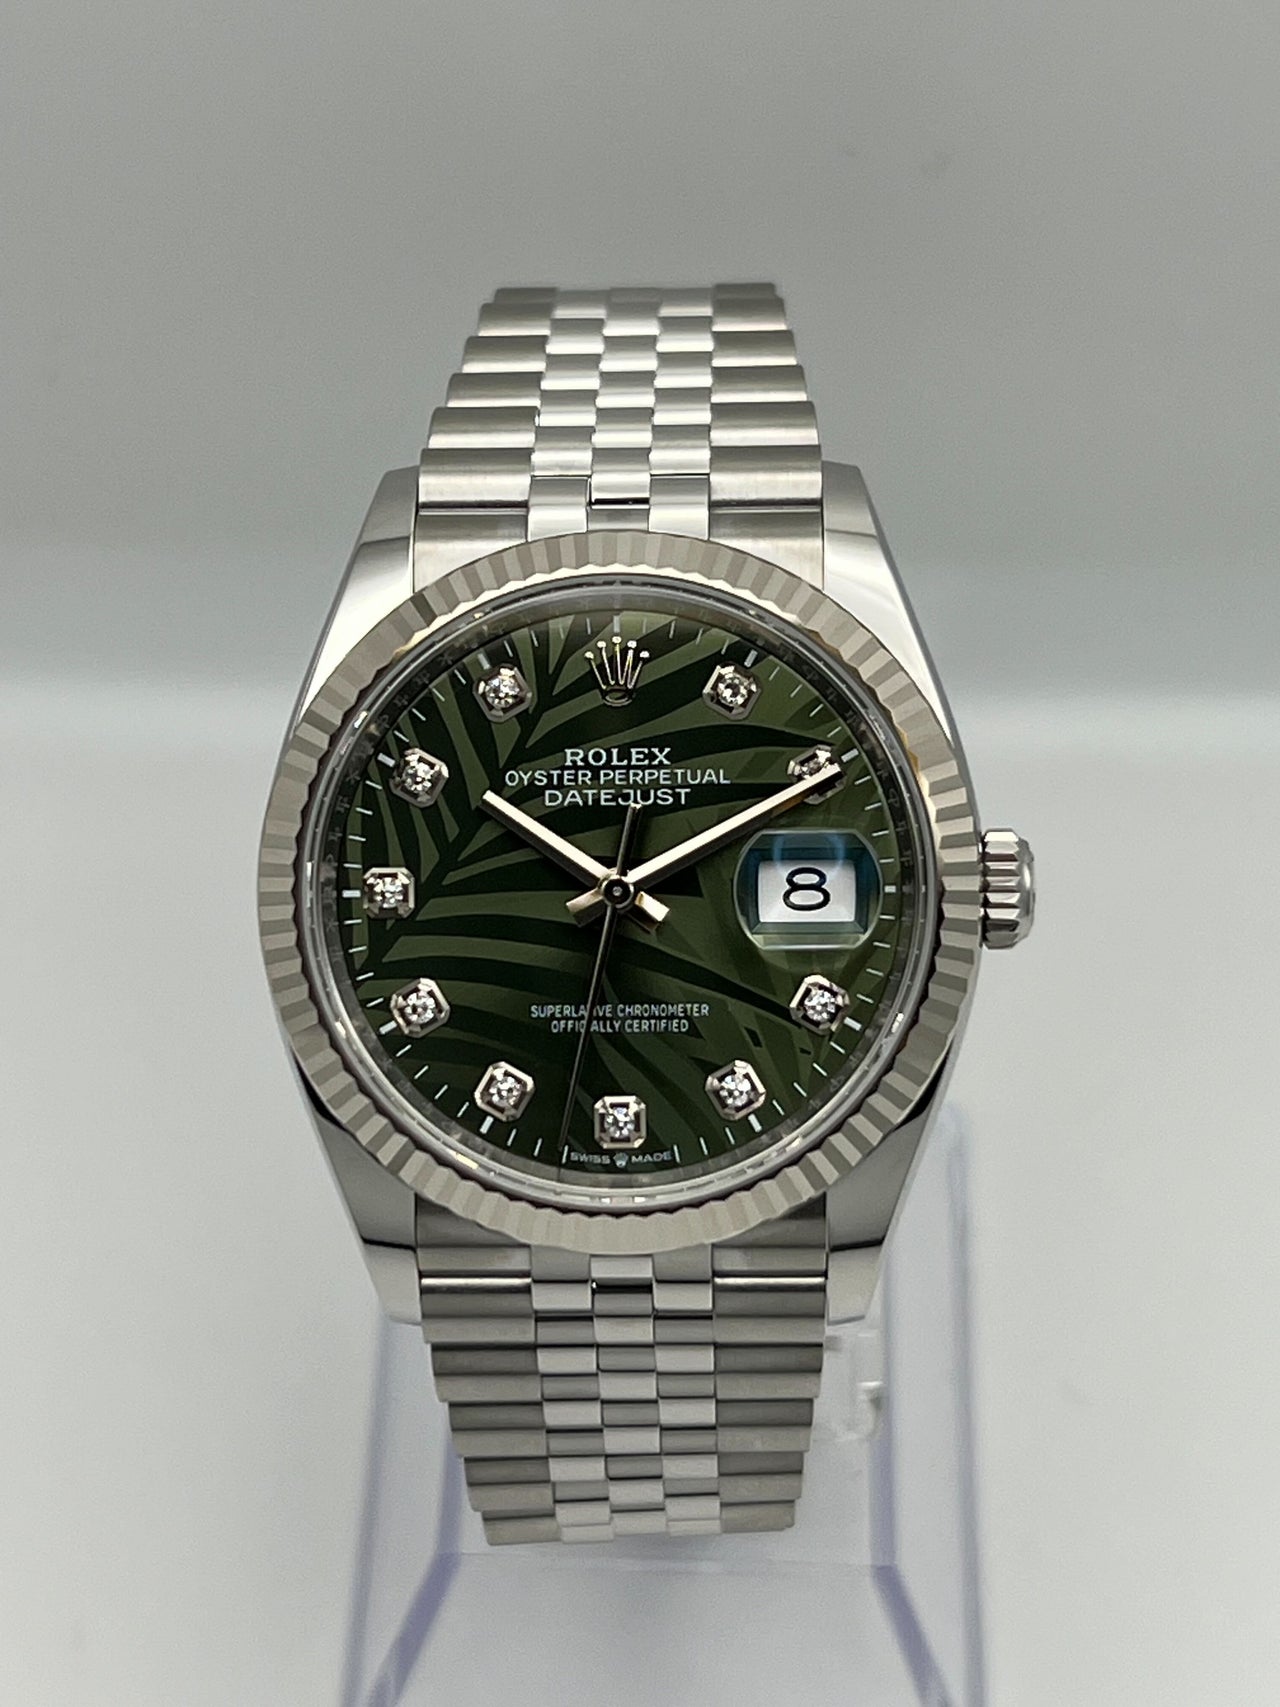 Rolex Datejust 126234 White Gold Stainless Steel Palm Motif Diamond Dial Jubilee